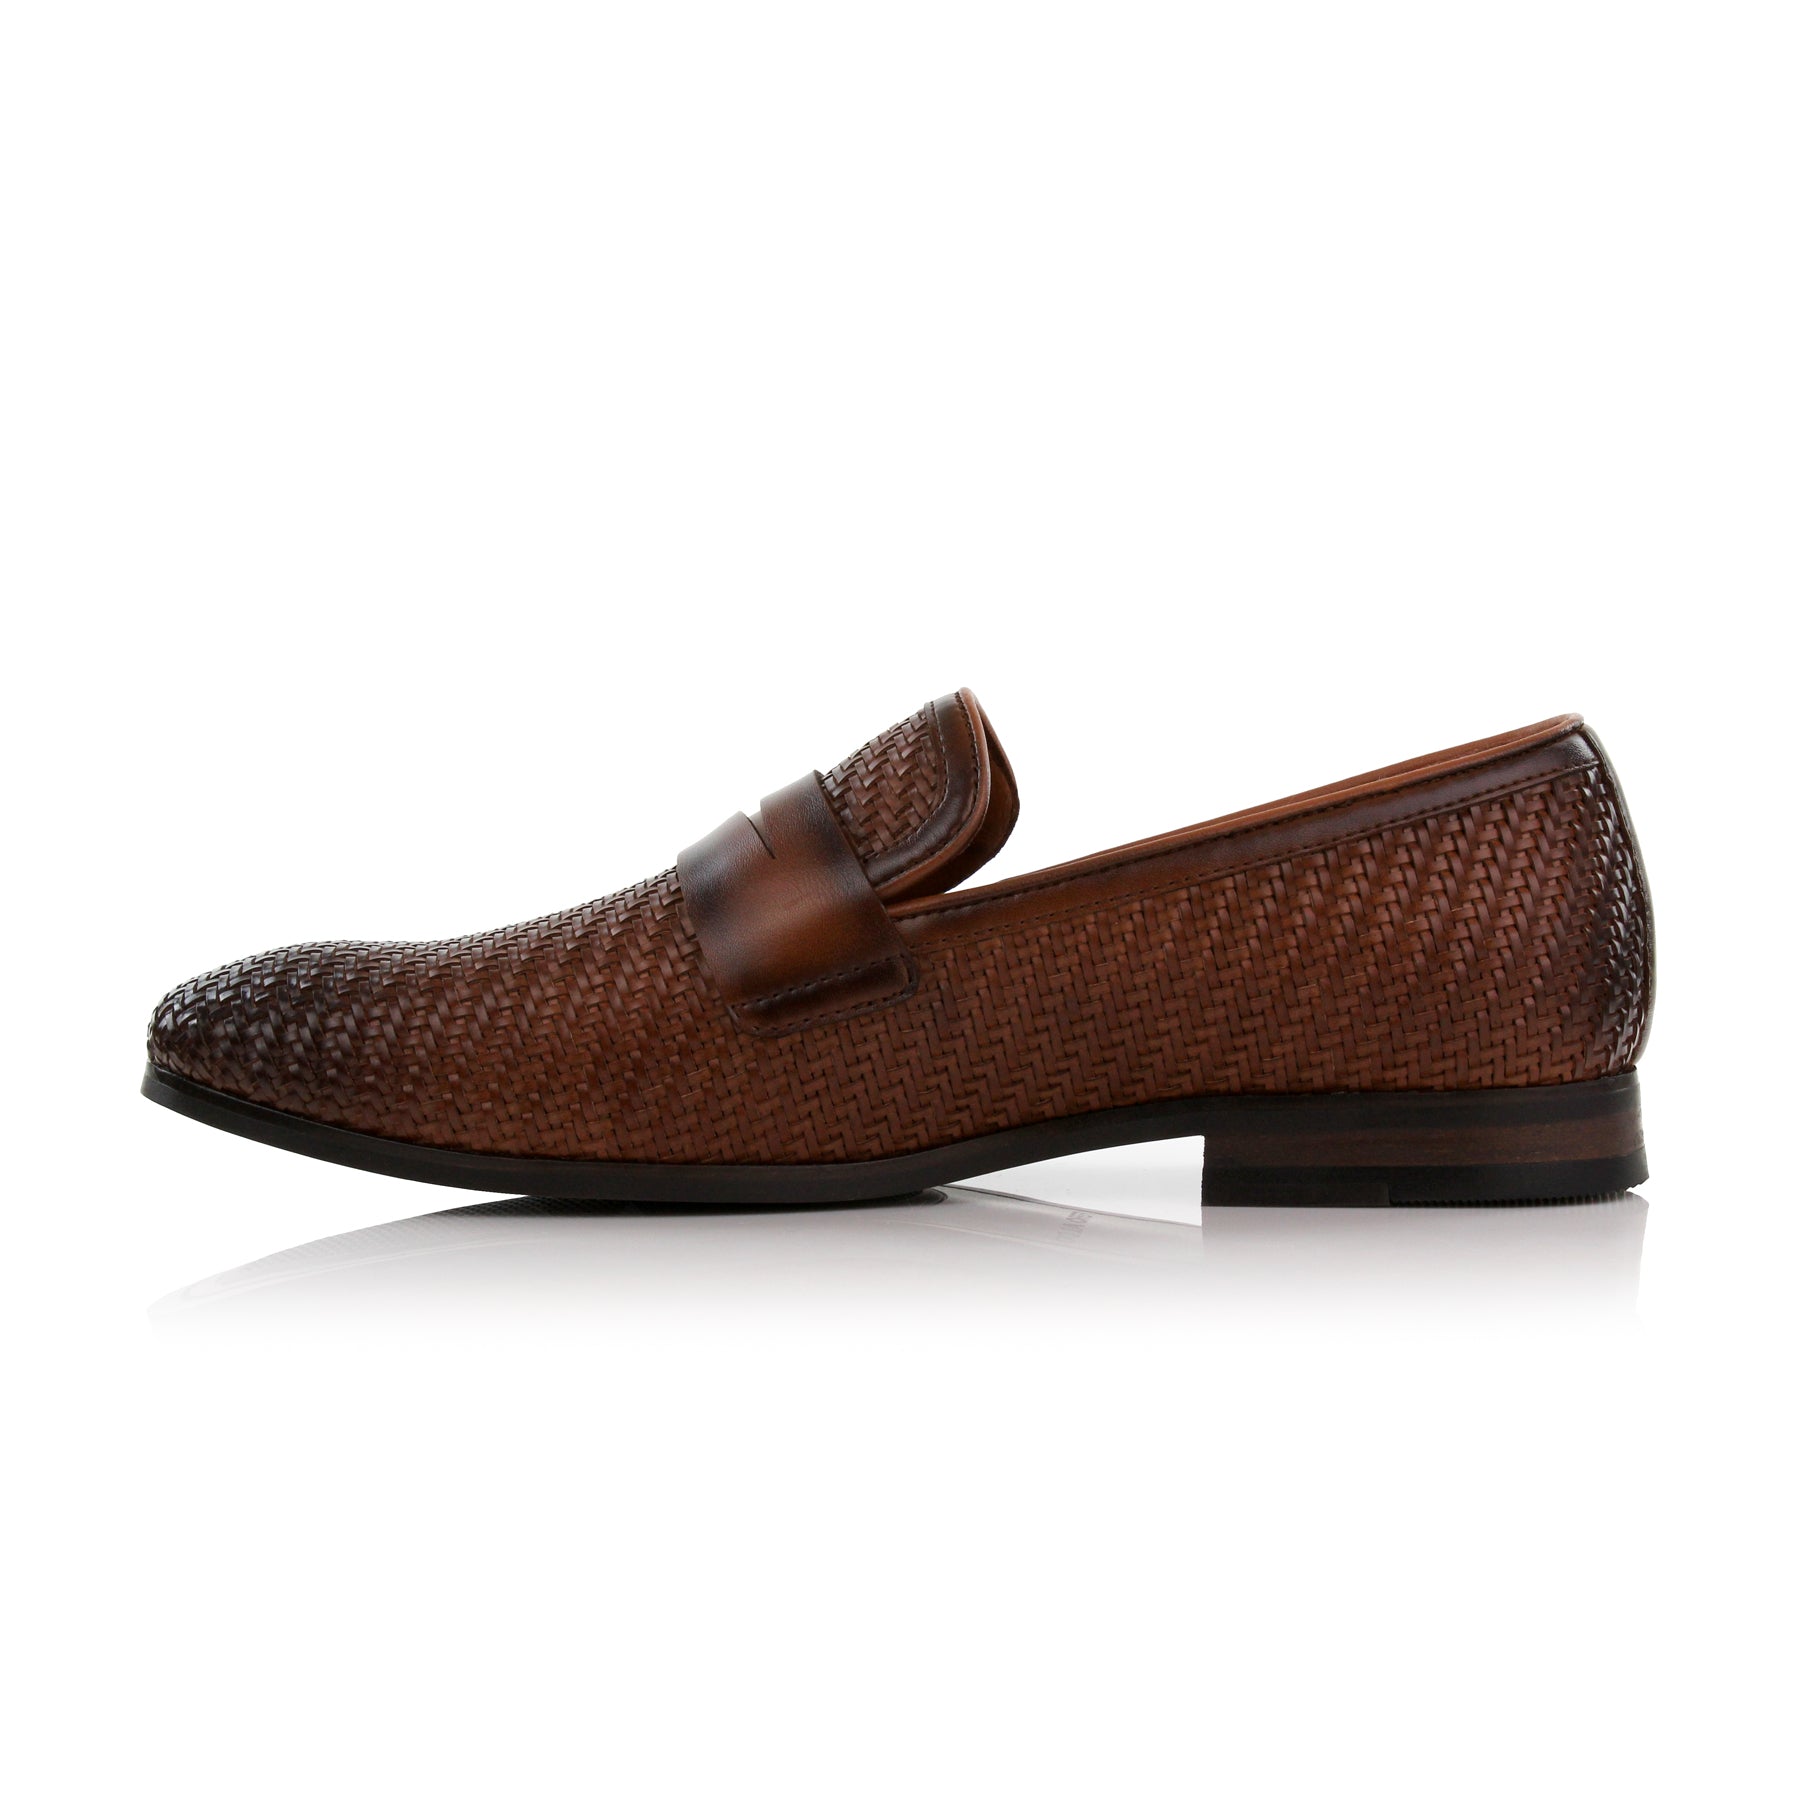 Burnished Woven Loafers | Louie by Ferro Aldo | Conal Footwear | Inner Side Angle View